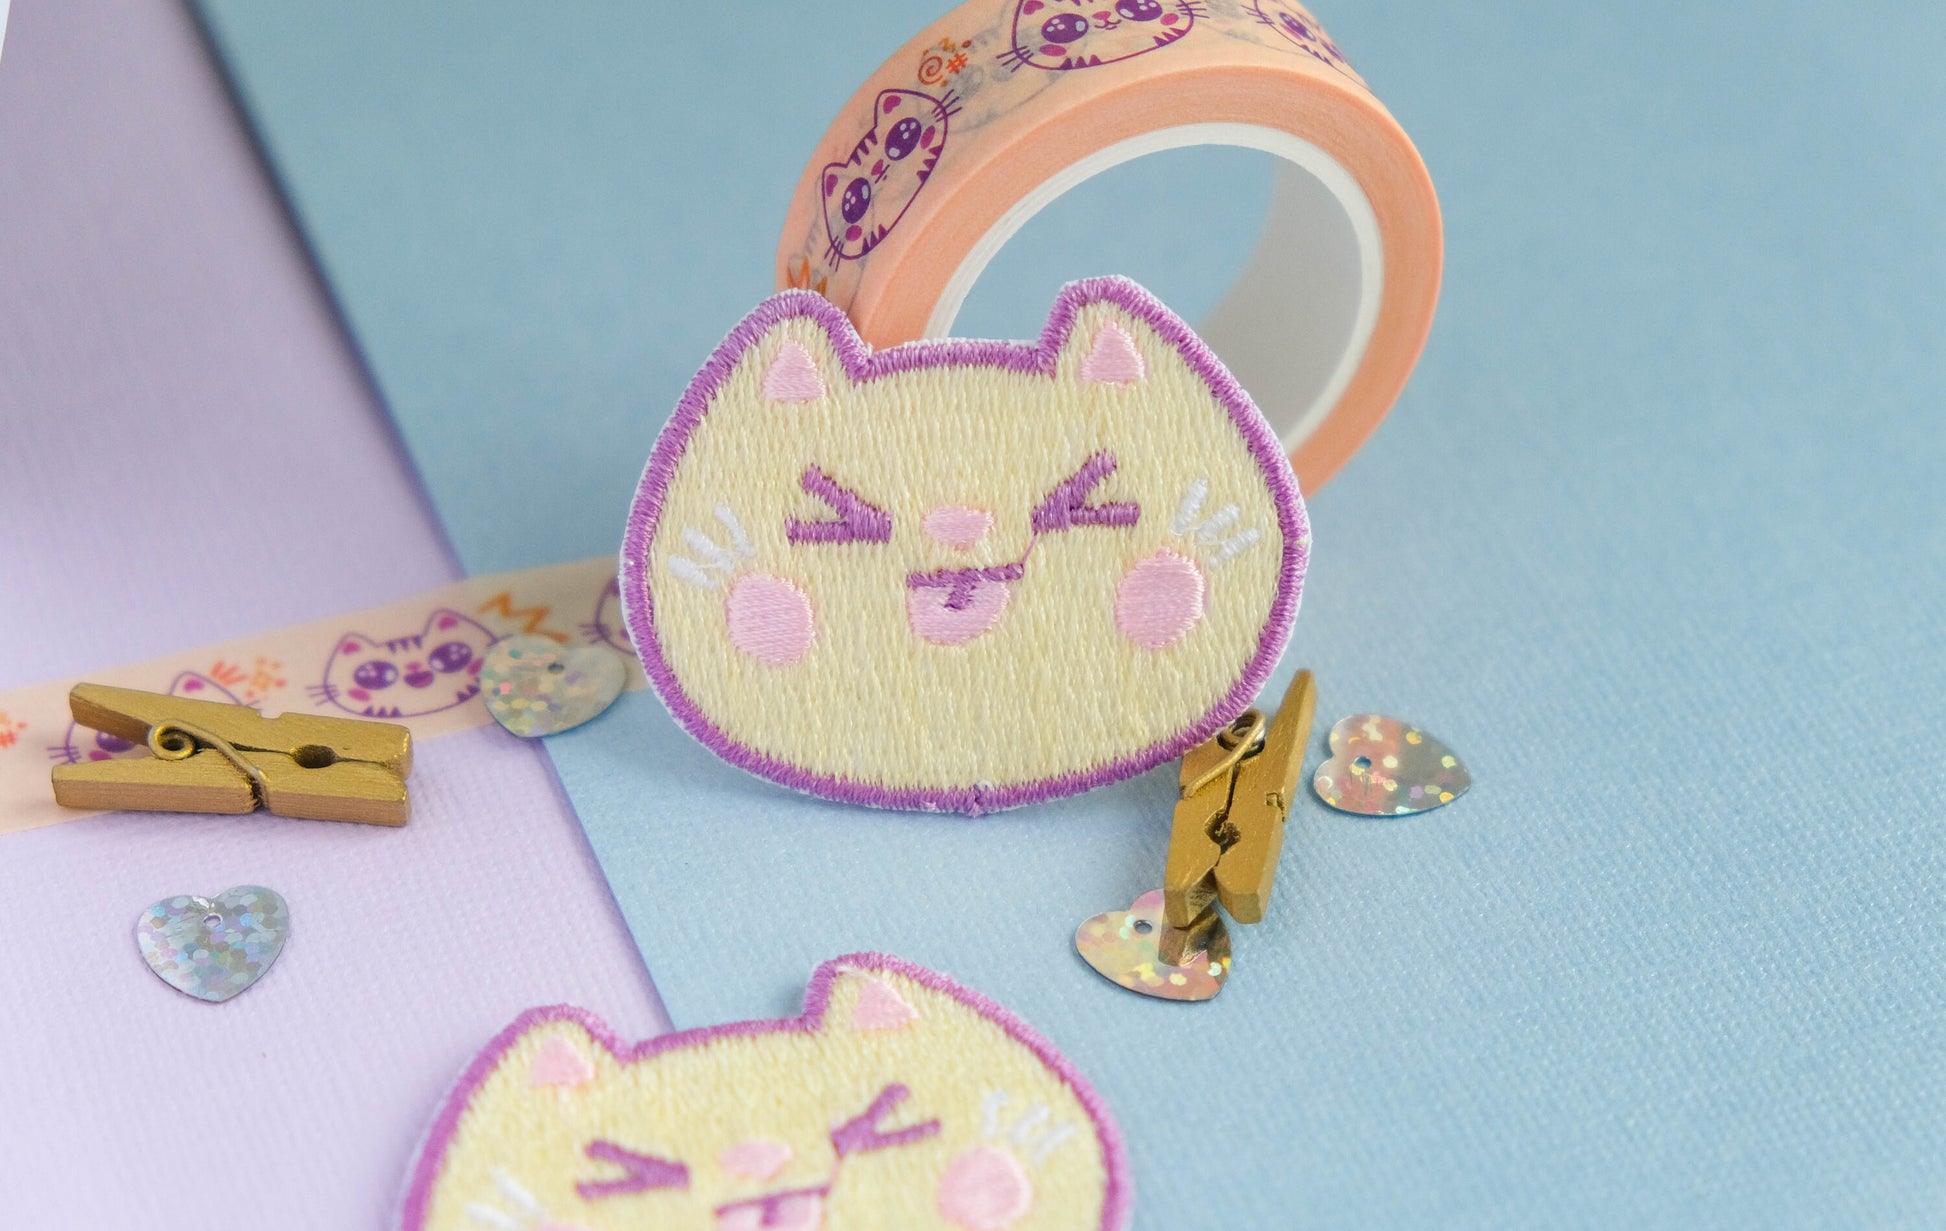 Cute patch iron-on embroidery cute yellow cheeky cat with his tongue out to decorate jackets and jeans